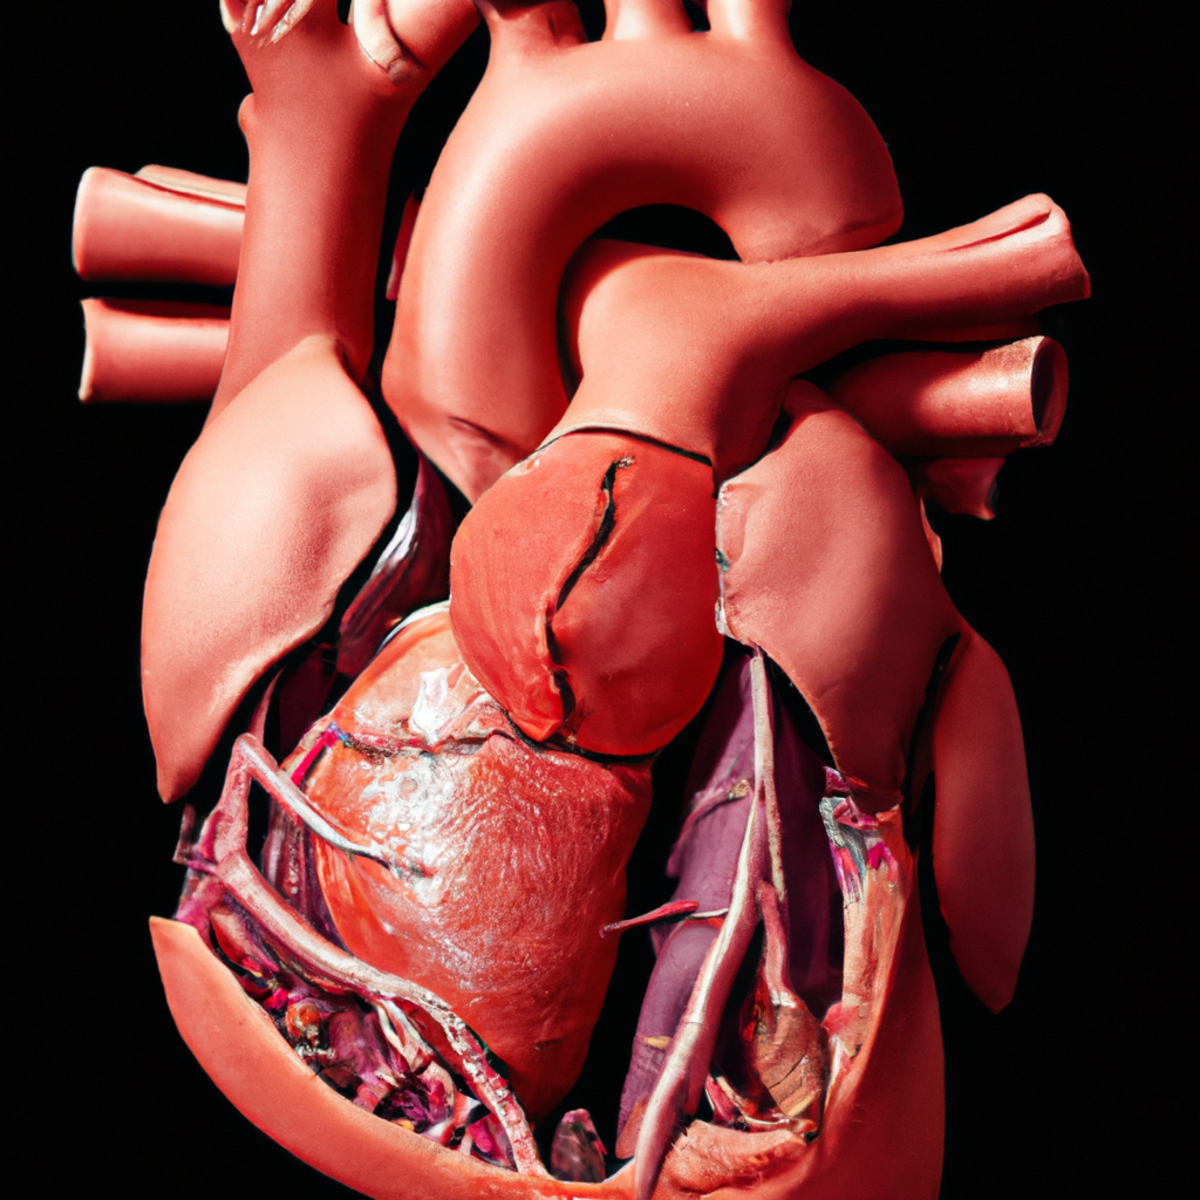 Close-up of human heart with vibrant red muscle, revealing giant cells in myocardium, indicating Giant Cell Myocarditis.